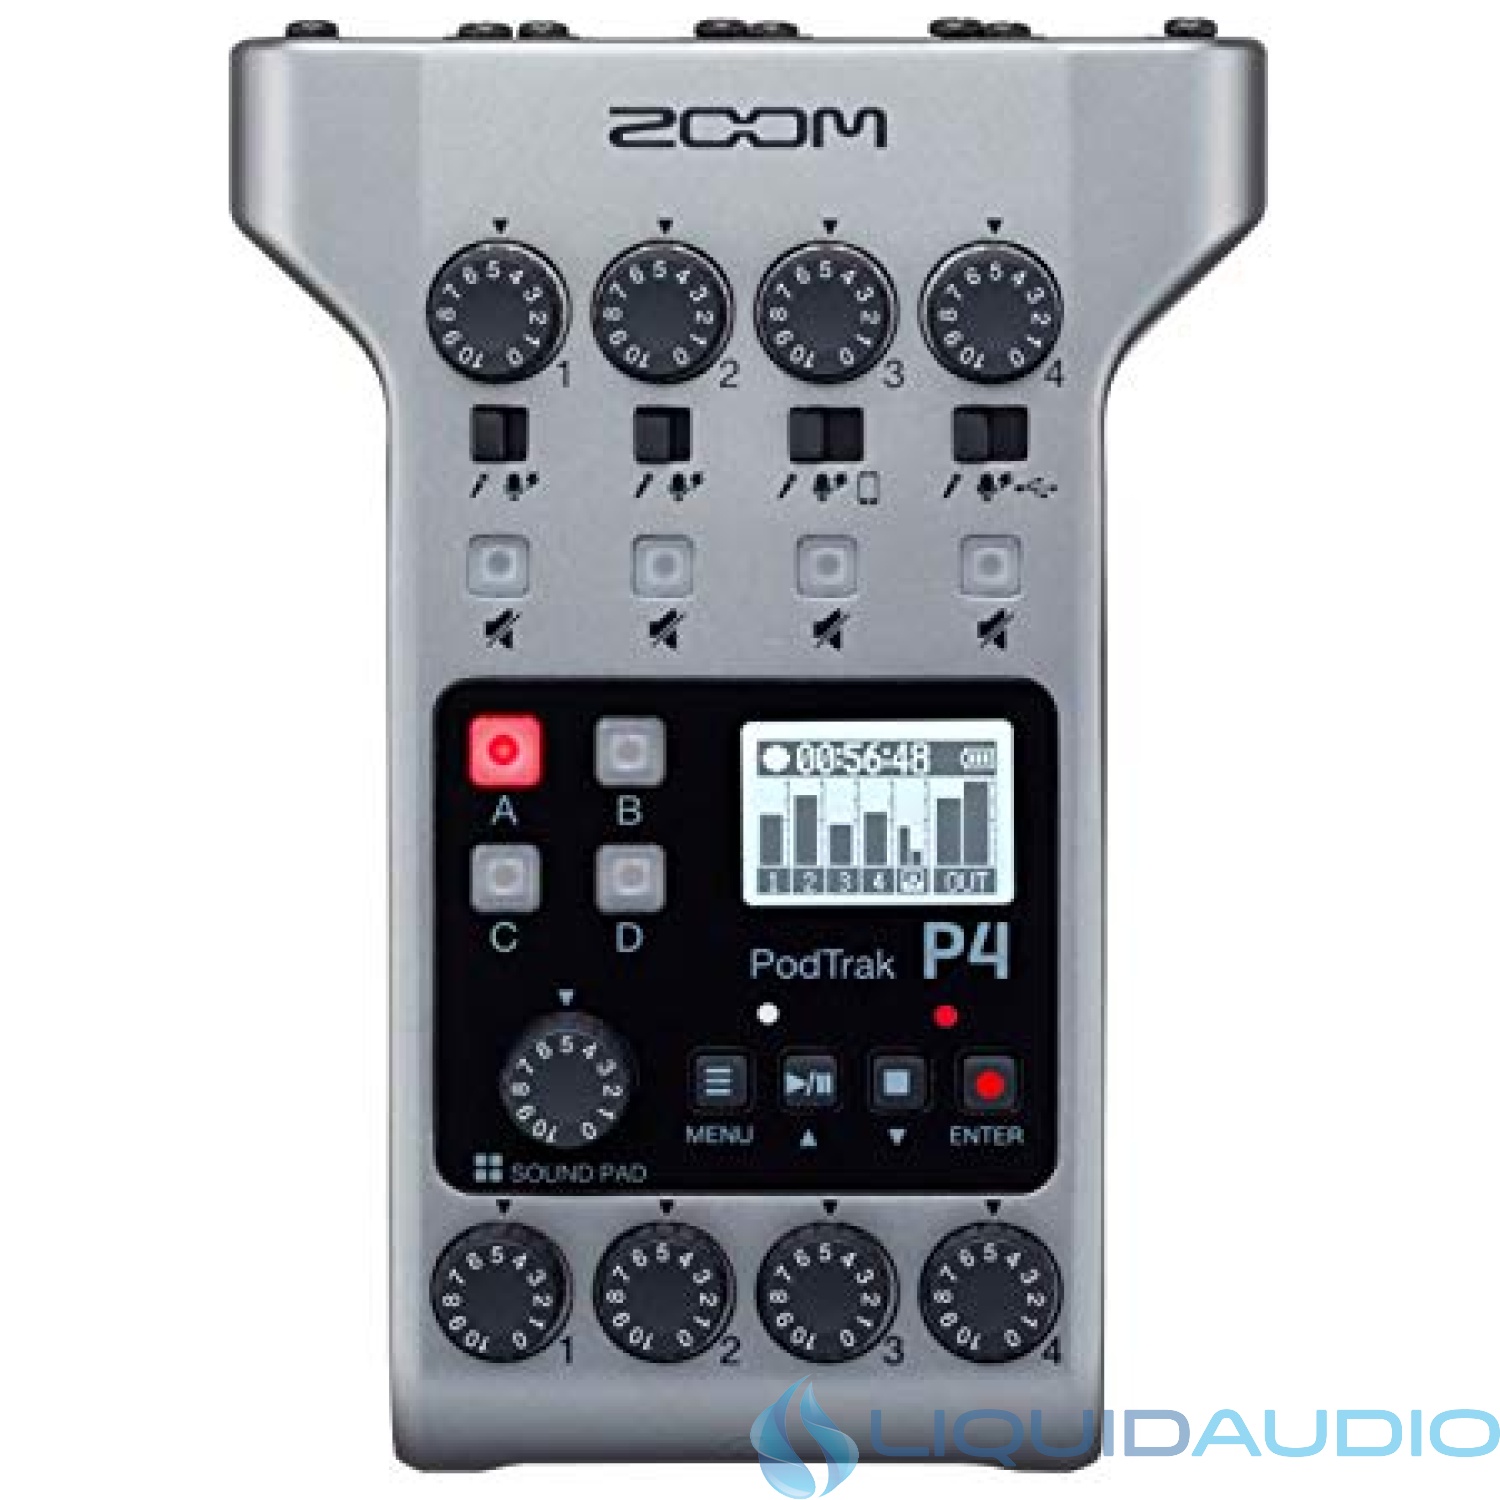 Zoom PodTrak P4 Podcast Recorder, Battery Powered, 4 Microphone Inputs, 4 Headphone Outputs, Phone Input, Sound Pads, Record to SD card, Audio Interface Mode